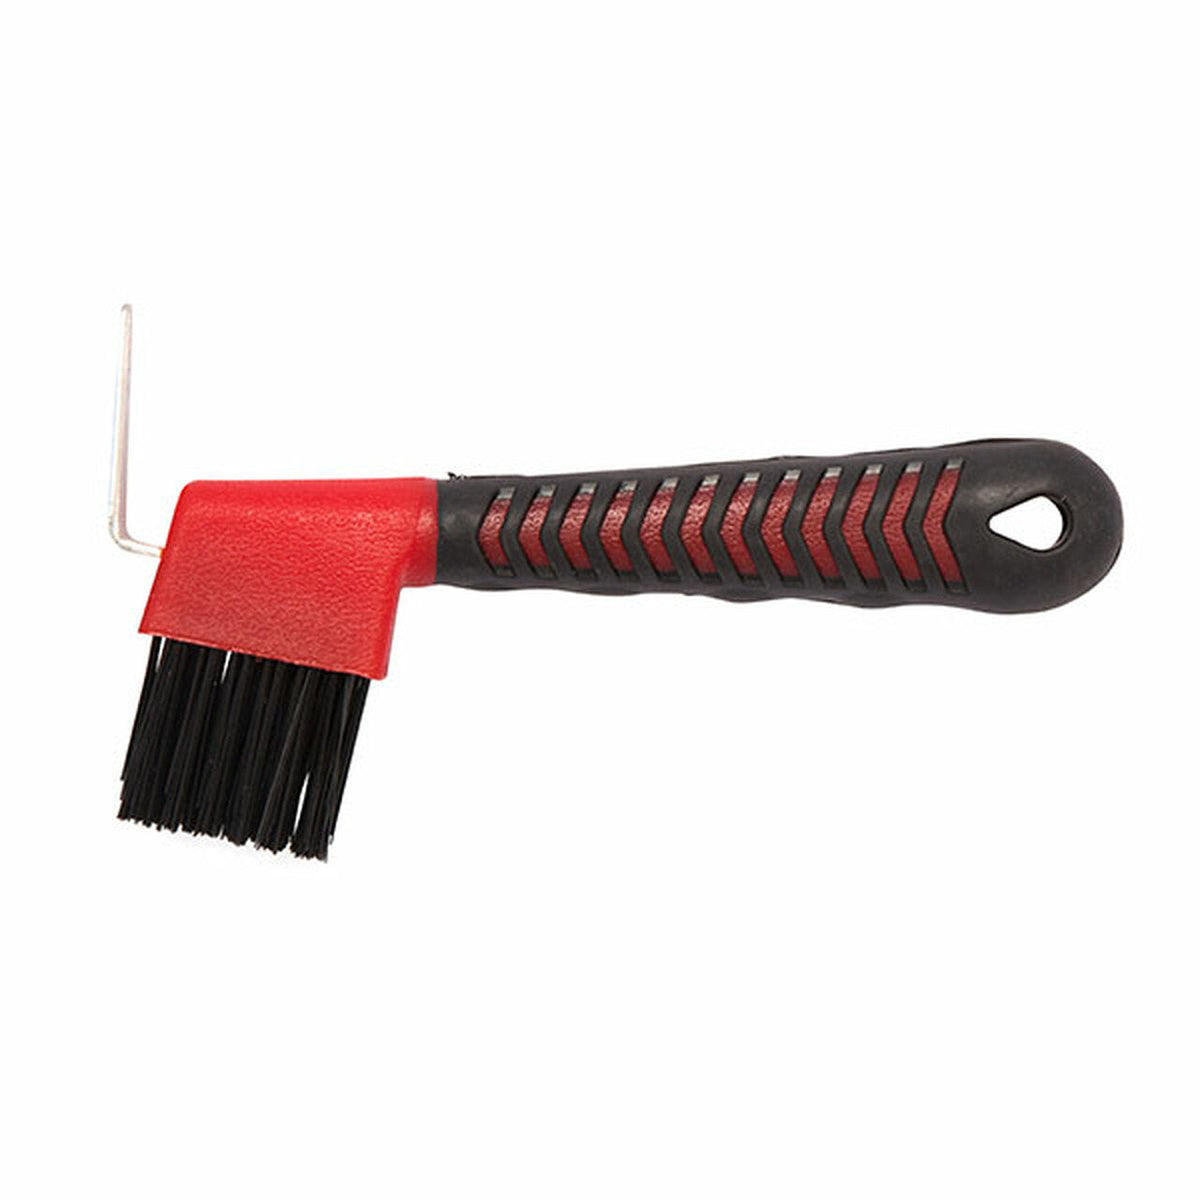 Side view of red hoof pick with black shaped handle and bristles.